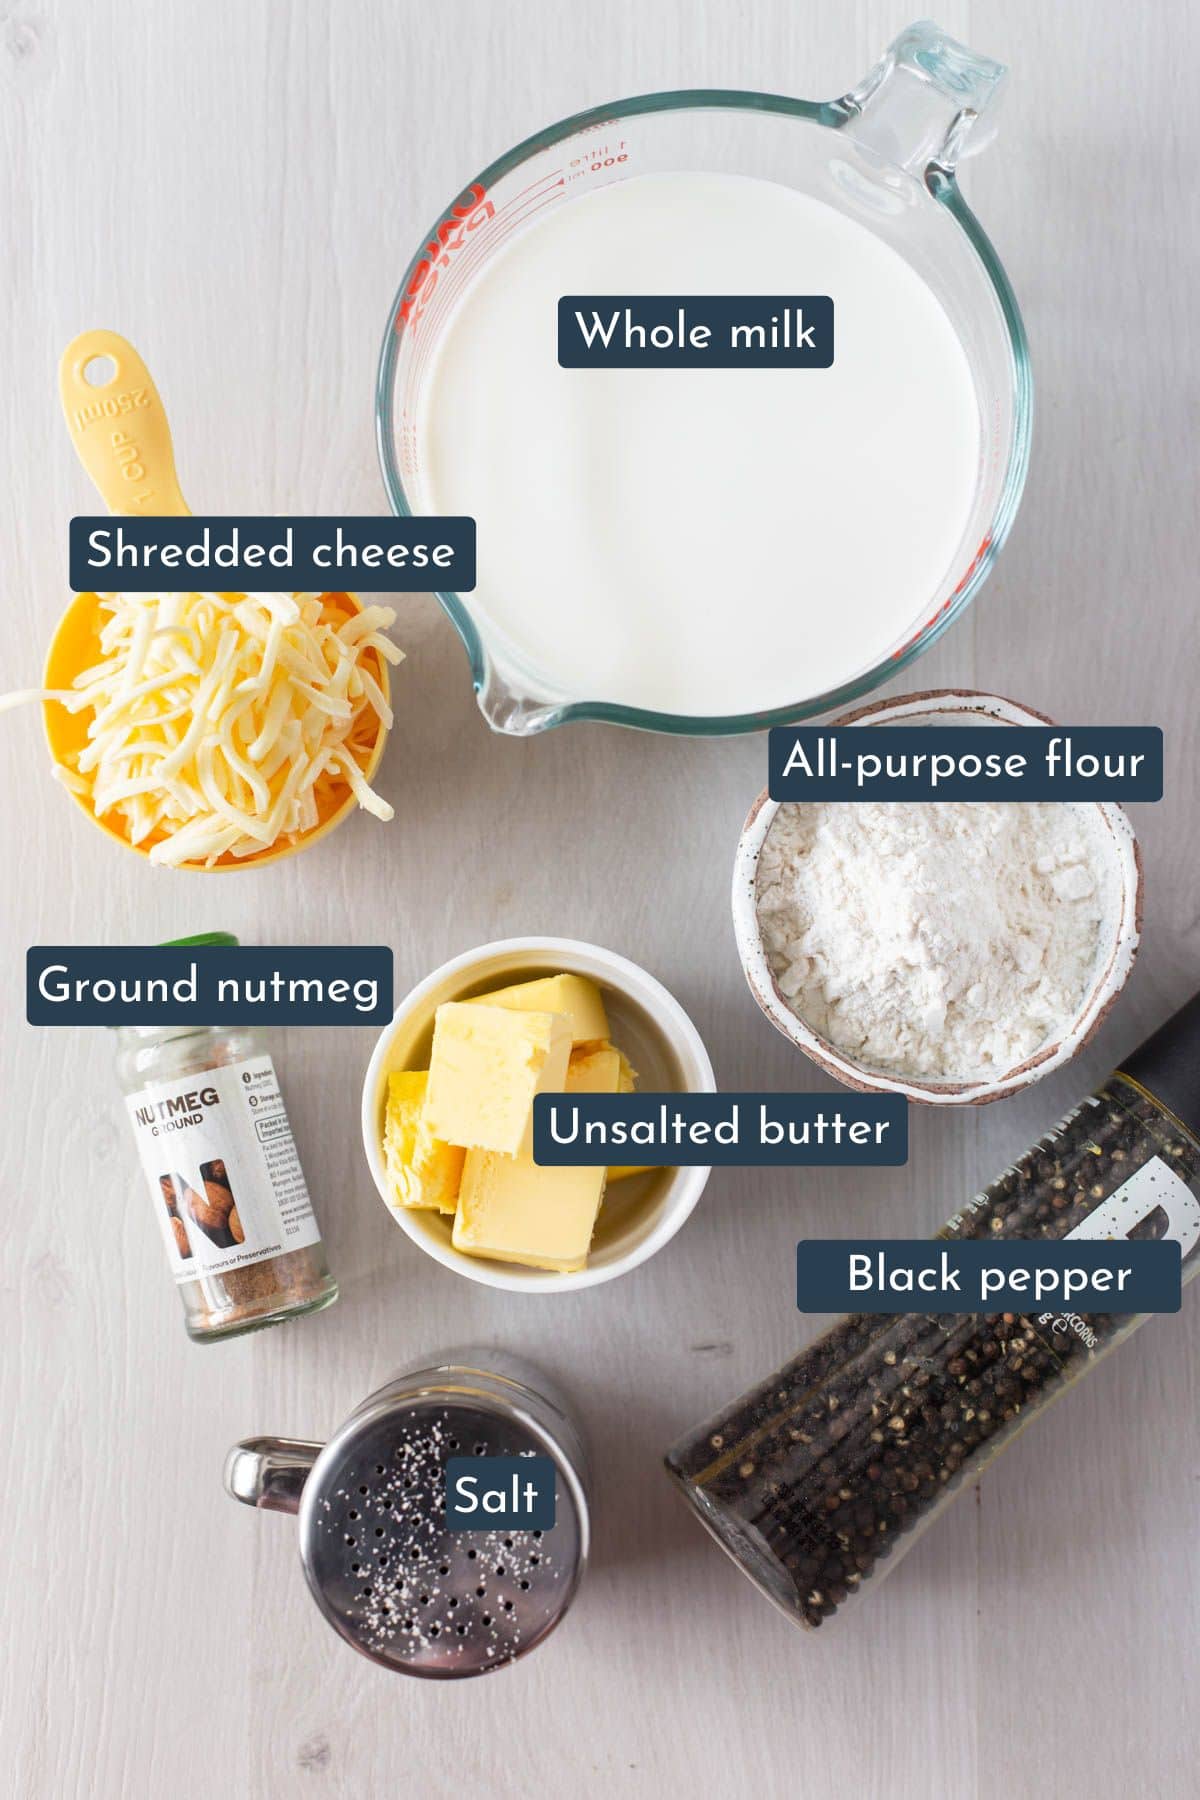 Individual ingredients laid out to make béchamel sauce are whole milk, unsalted butter, all-purpose flour, ground nutmeg, salt and pepper and shredded cheese.